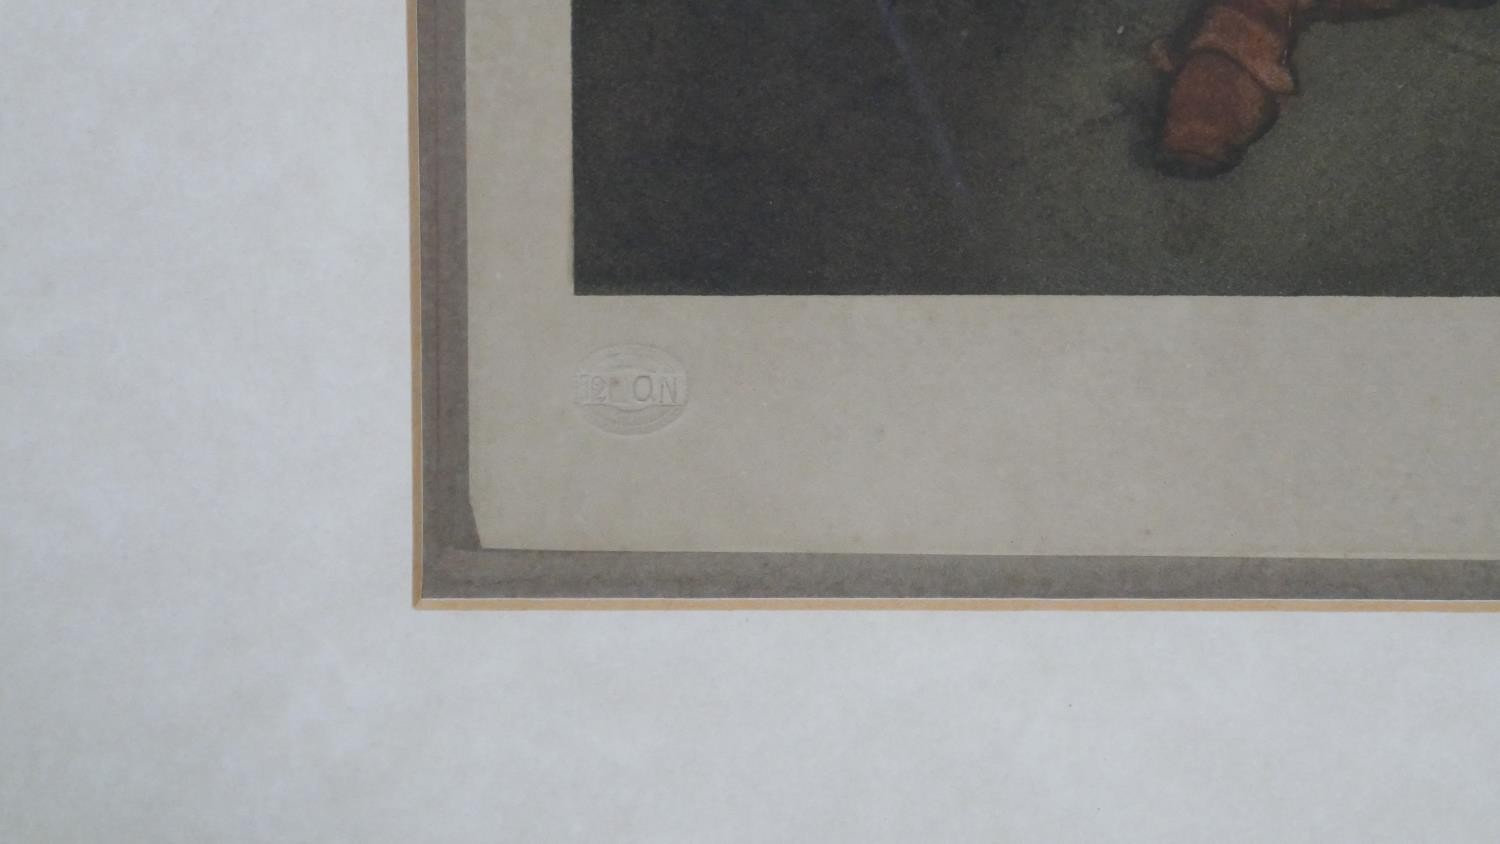 P Hampden Hart, aquatints of four famous paintings, with impressed water mark and signed. H.56 W. - Image 18 of 20